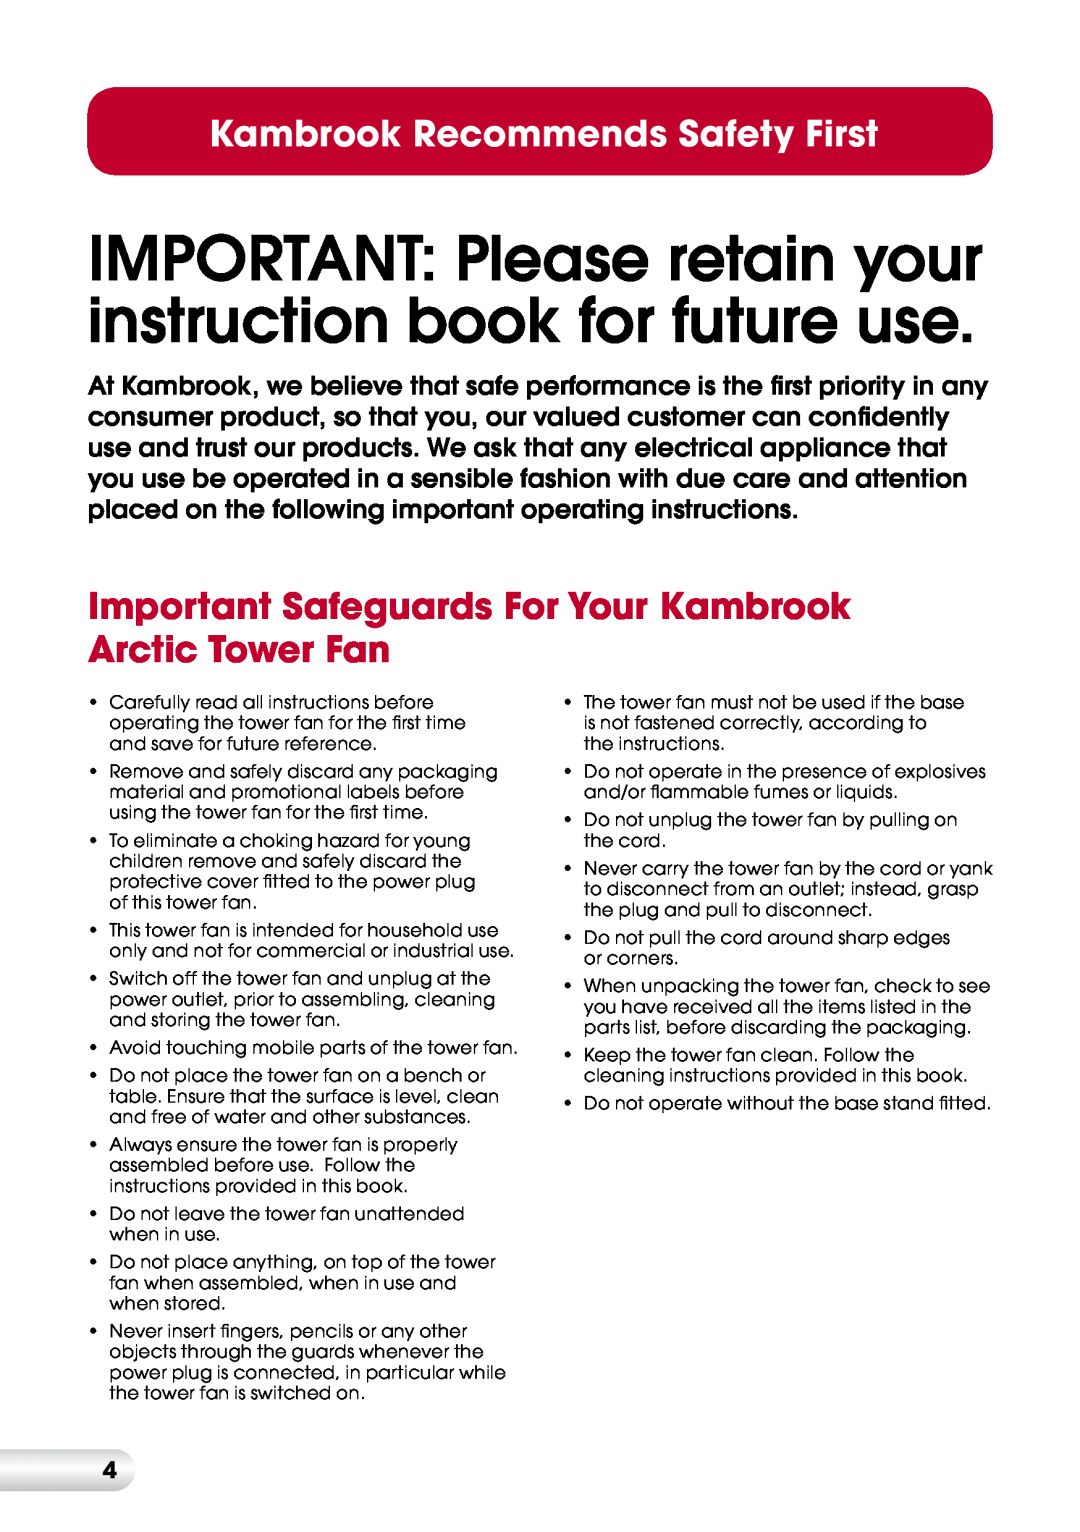 Kambrook KFA837 manual Important Safeguards For Your Kambrook Arctic Tower Fan, Kambrook Recommends Safety First 